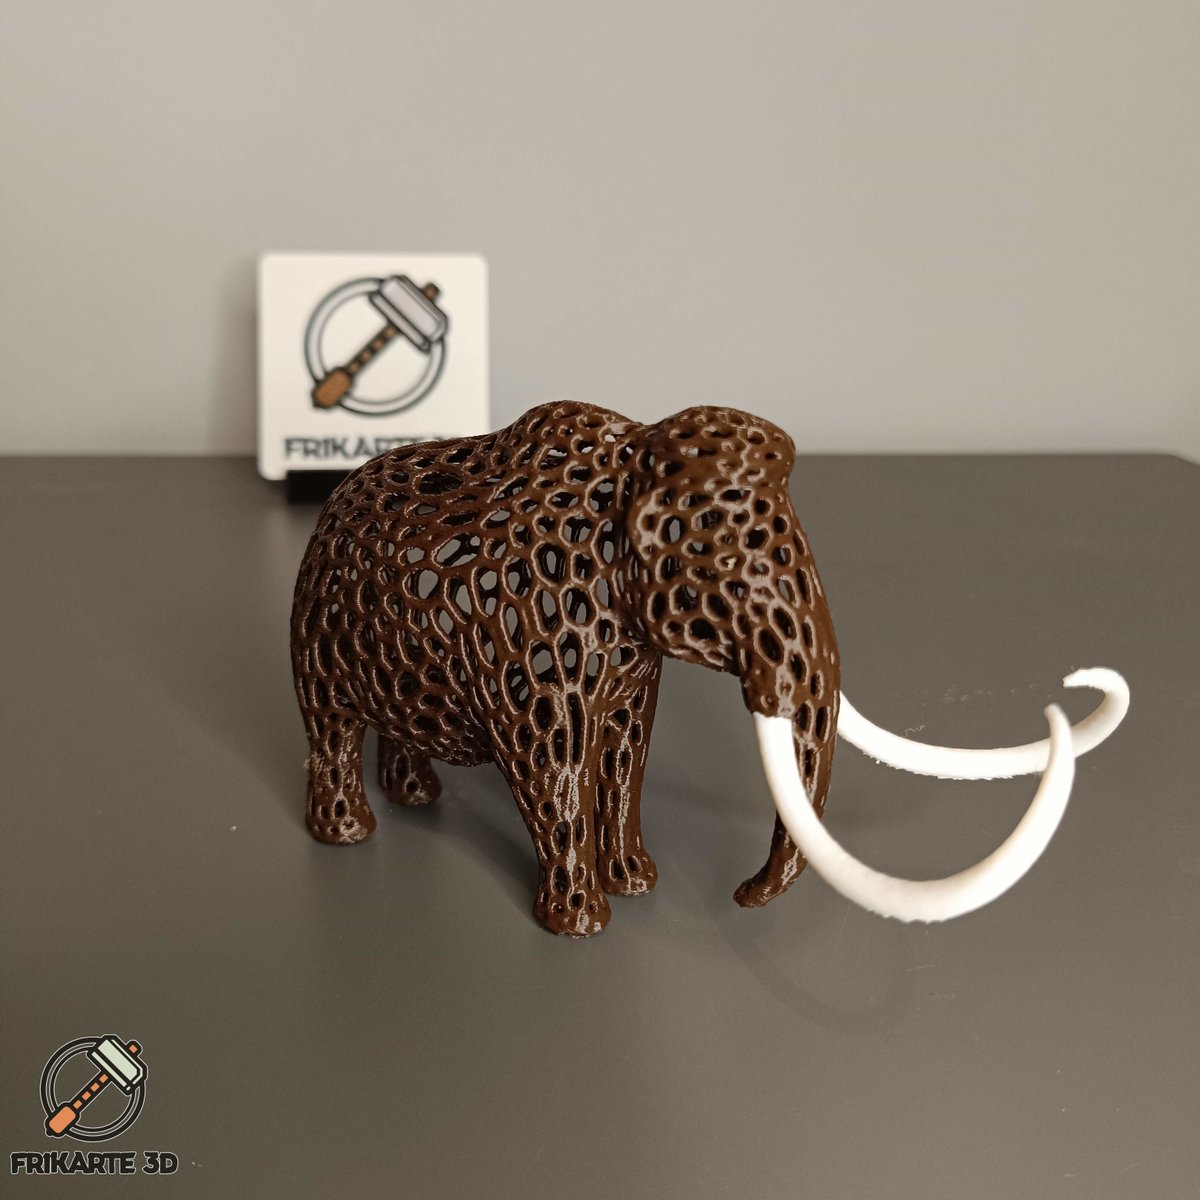 🐘 Celebrate #BiodiversityDay with the Voronoi Mammoth, a 3D tribute to a bygone titan. 🎨
🖨️ Print in multi-color splendor, from white fangs to a brown body, and let this ancient icon inspire conservation efforts.🌍
Available at @BambulabGlobal MakerWorld
makerworld.com/en/models/4493…